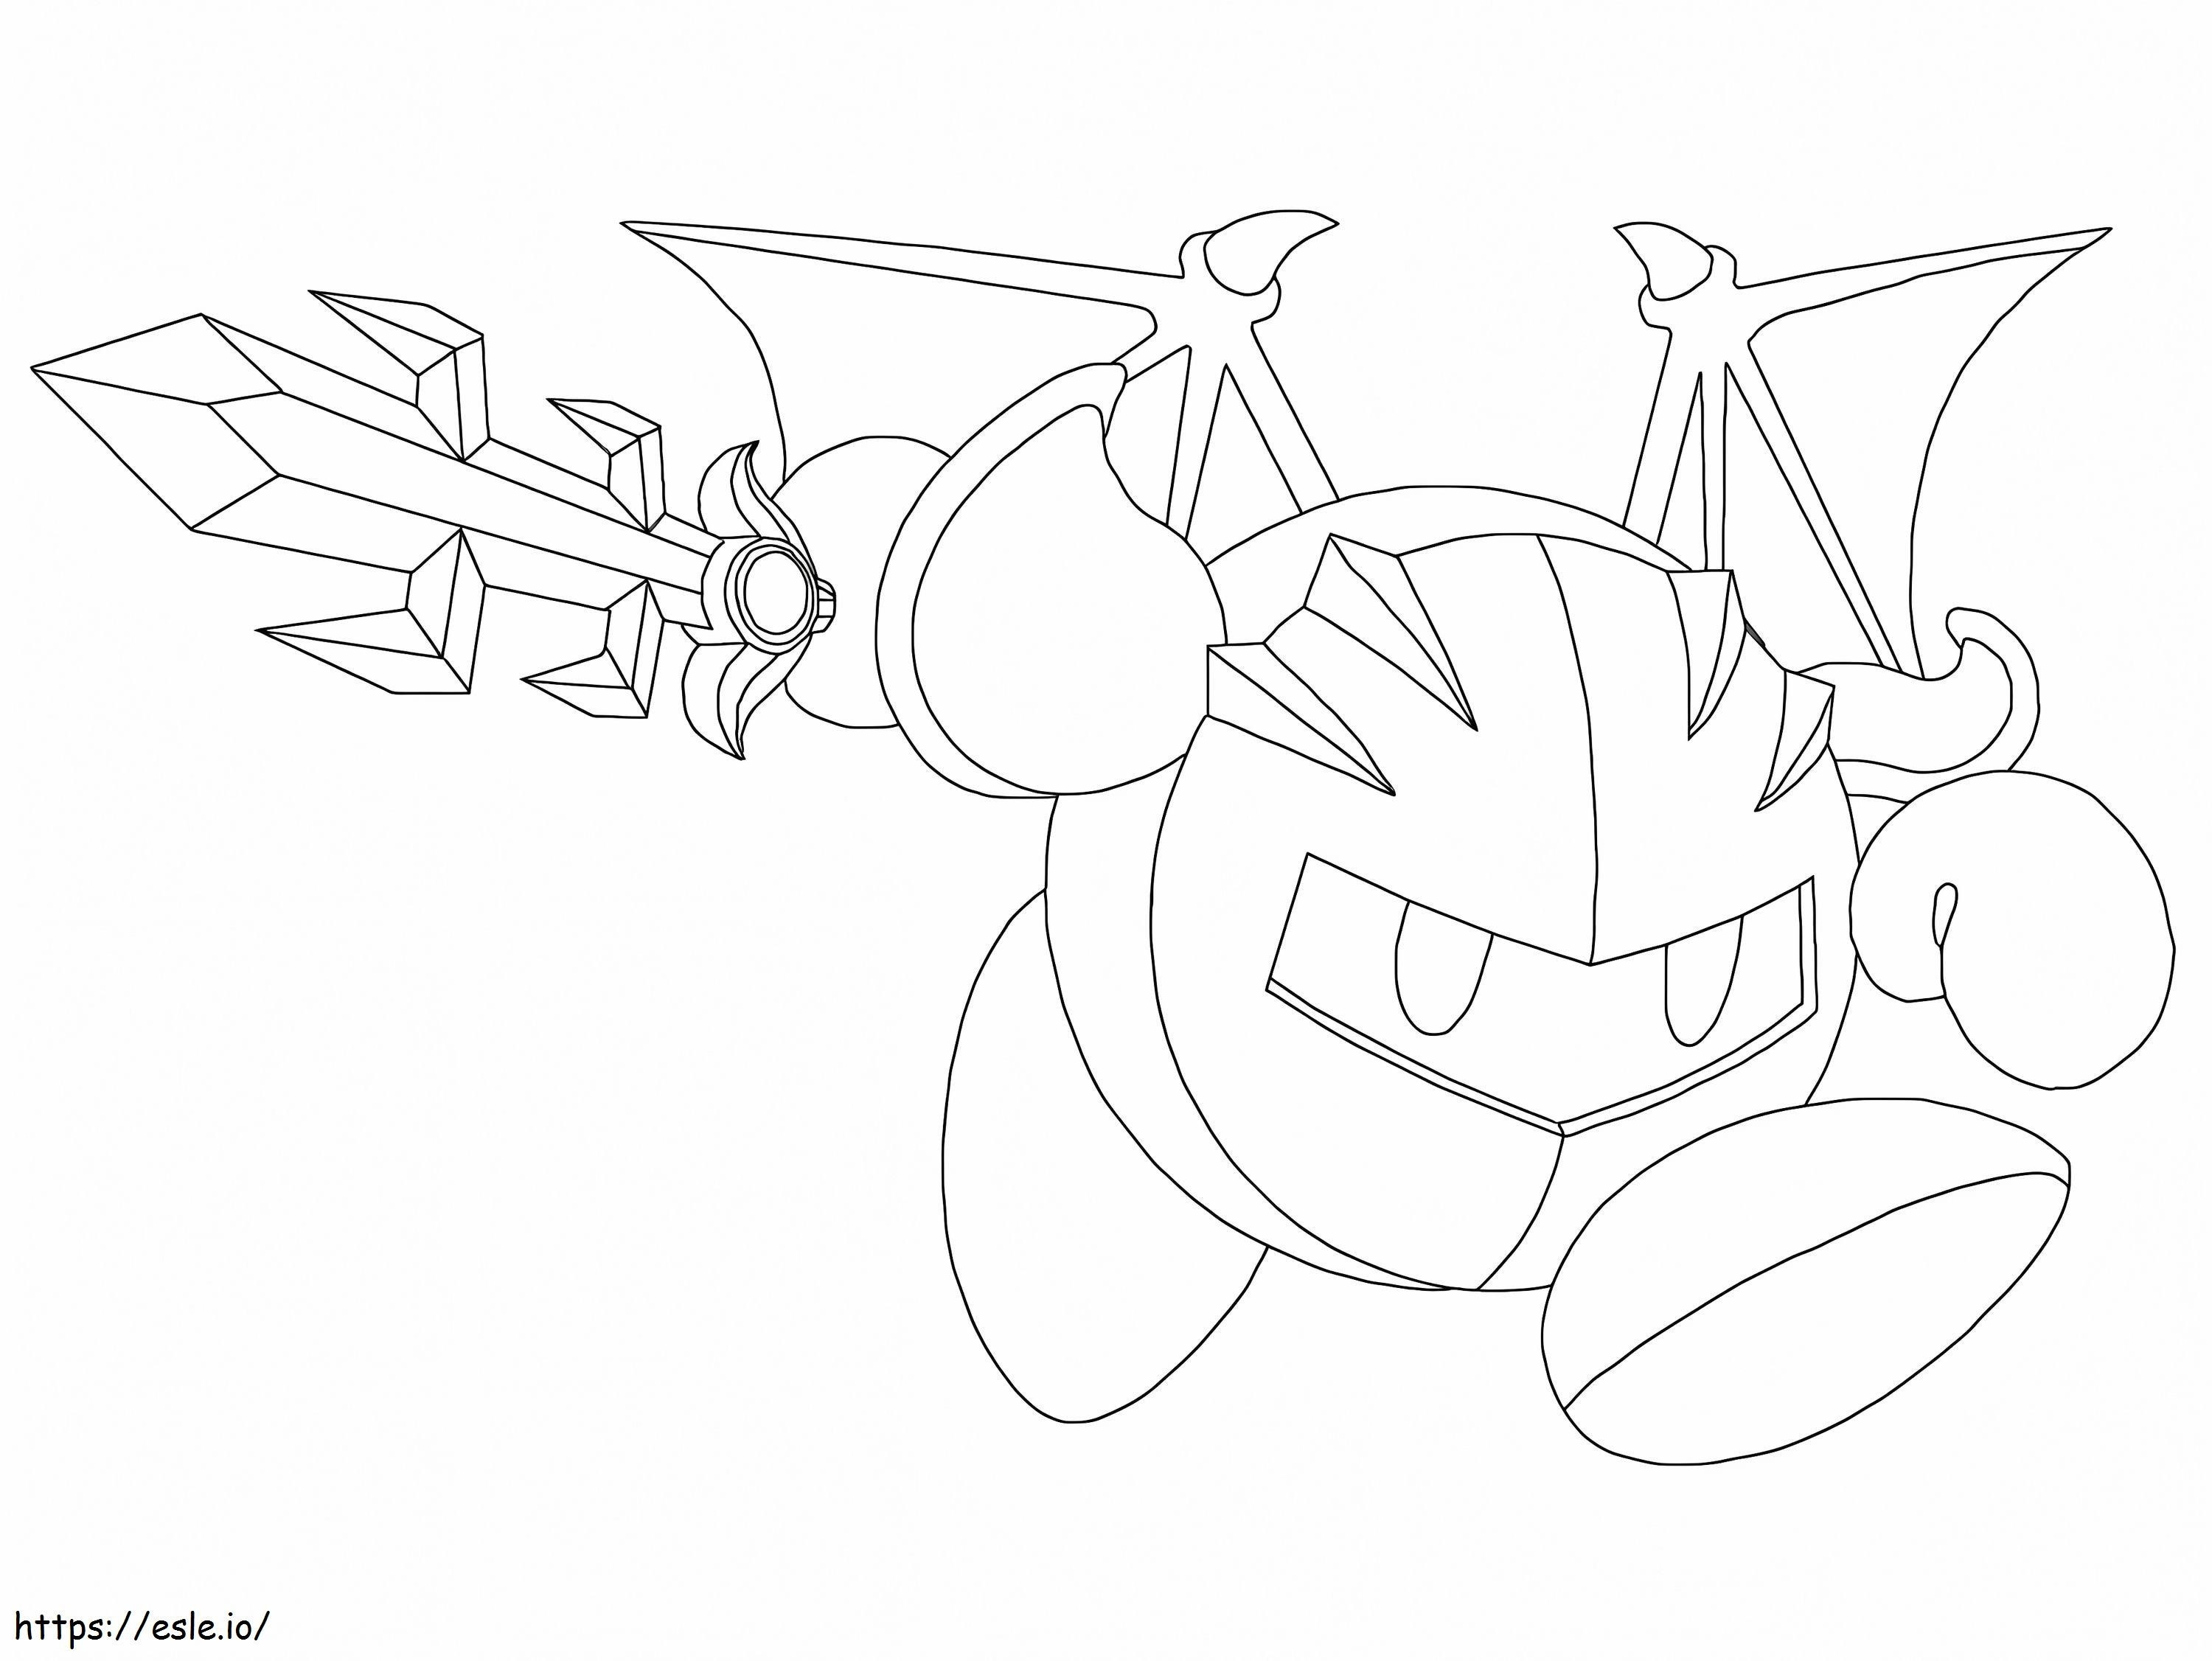 Meta Knight 3 coloring page